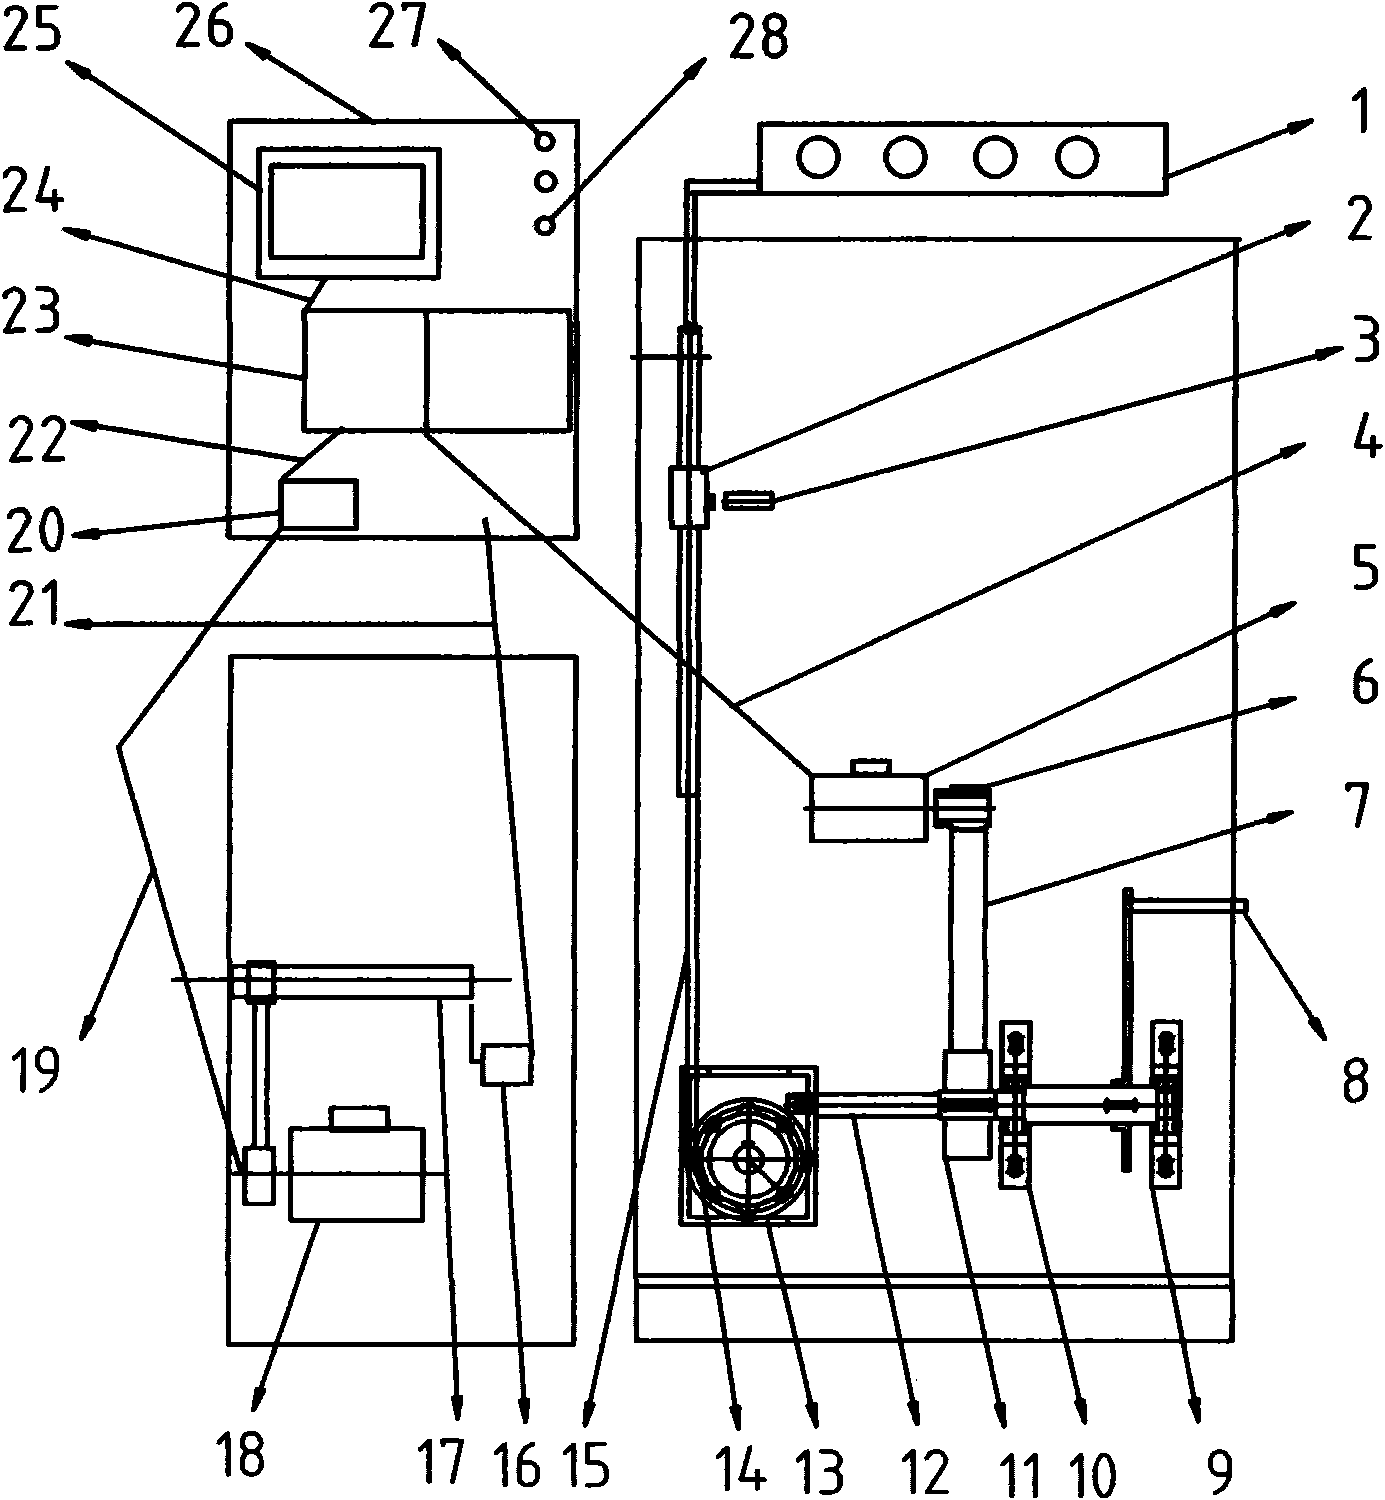 Numerical control molding system of spinning frame